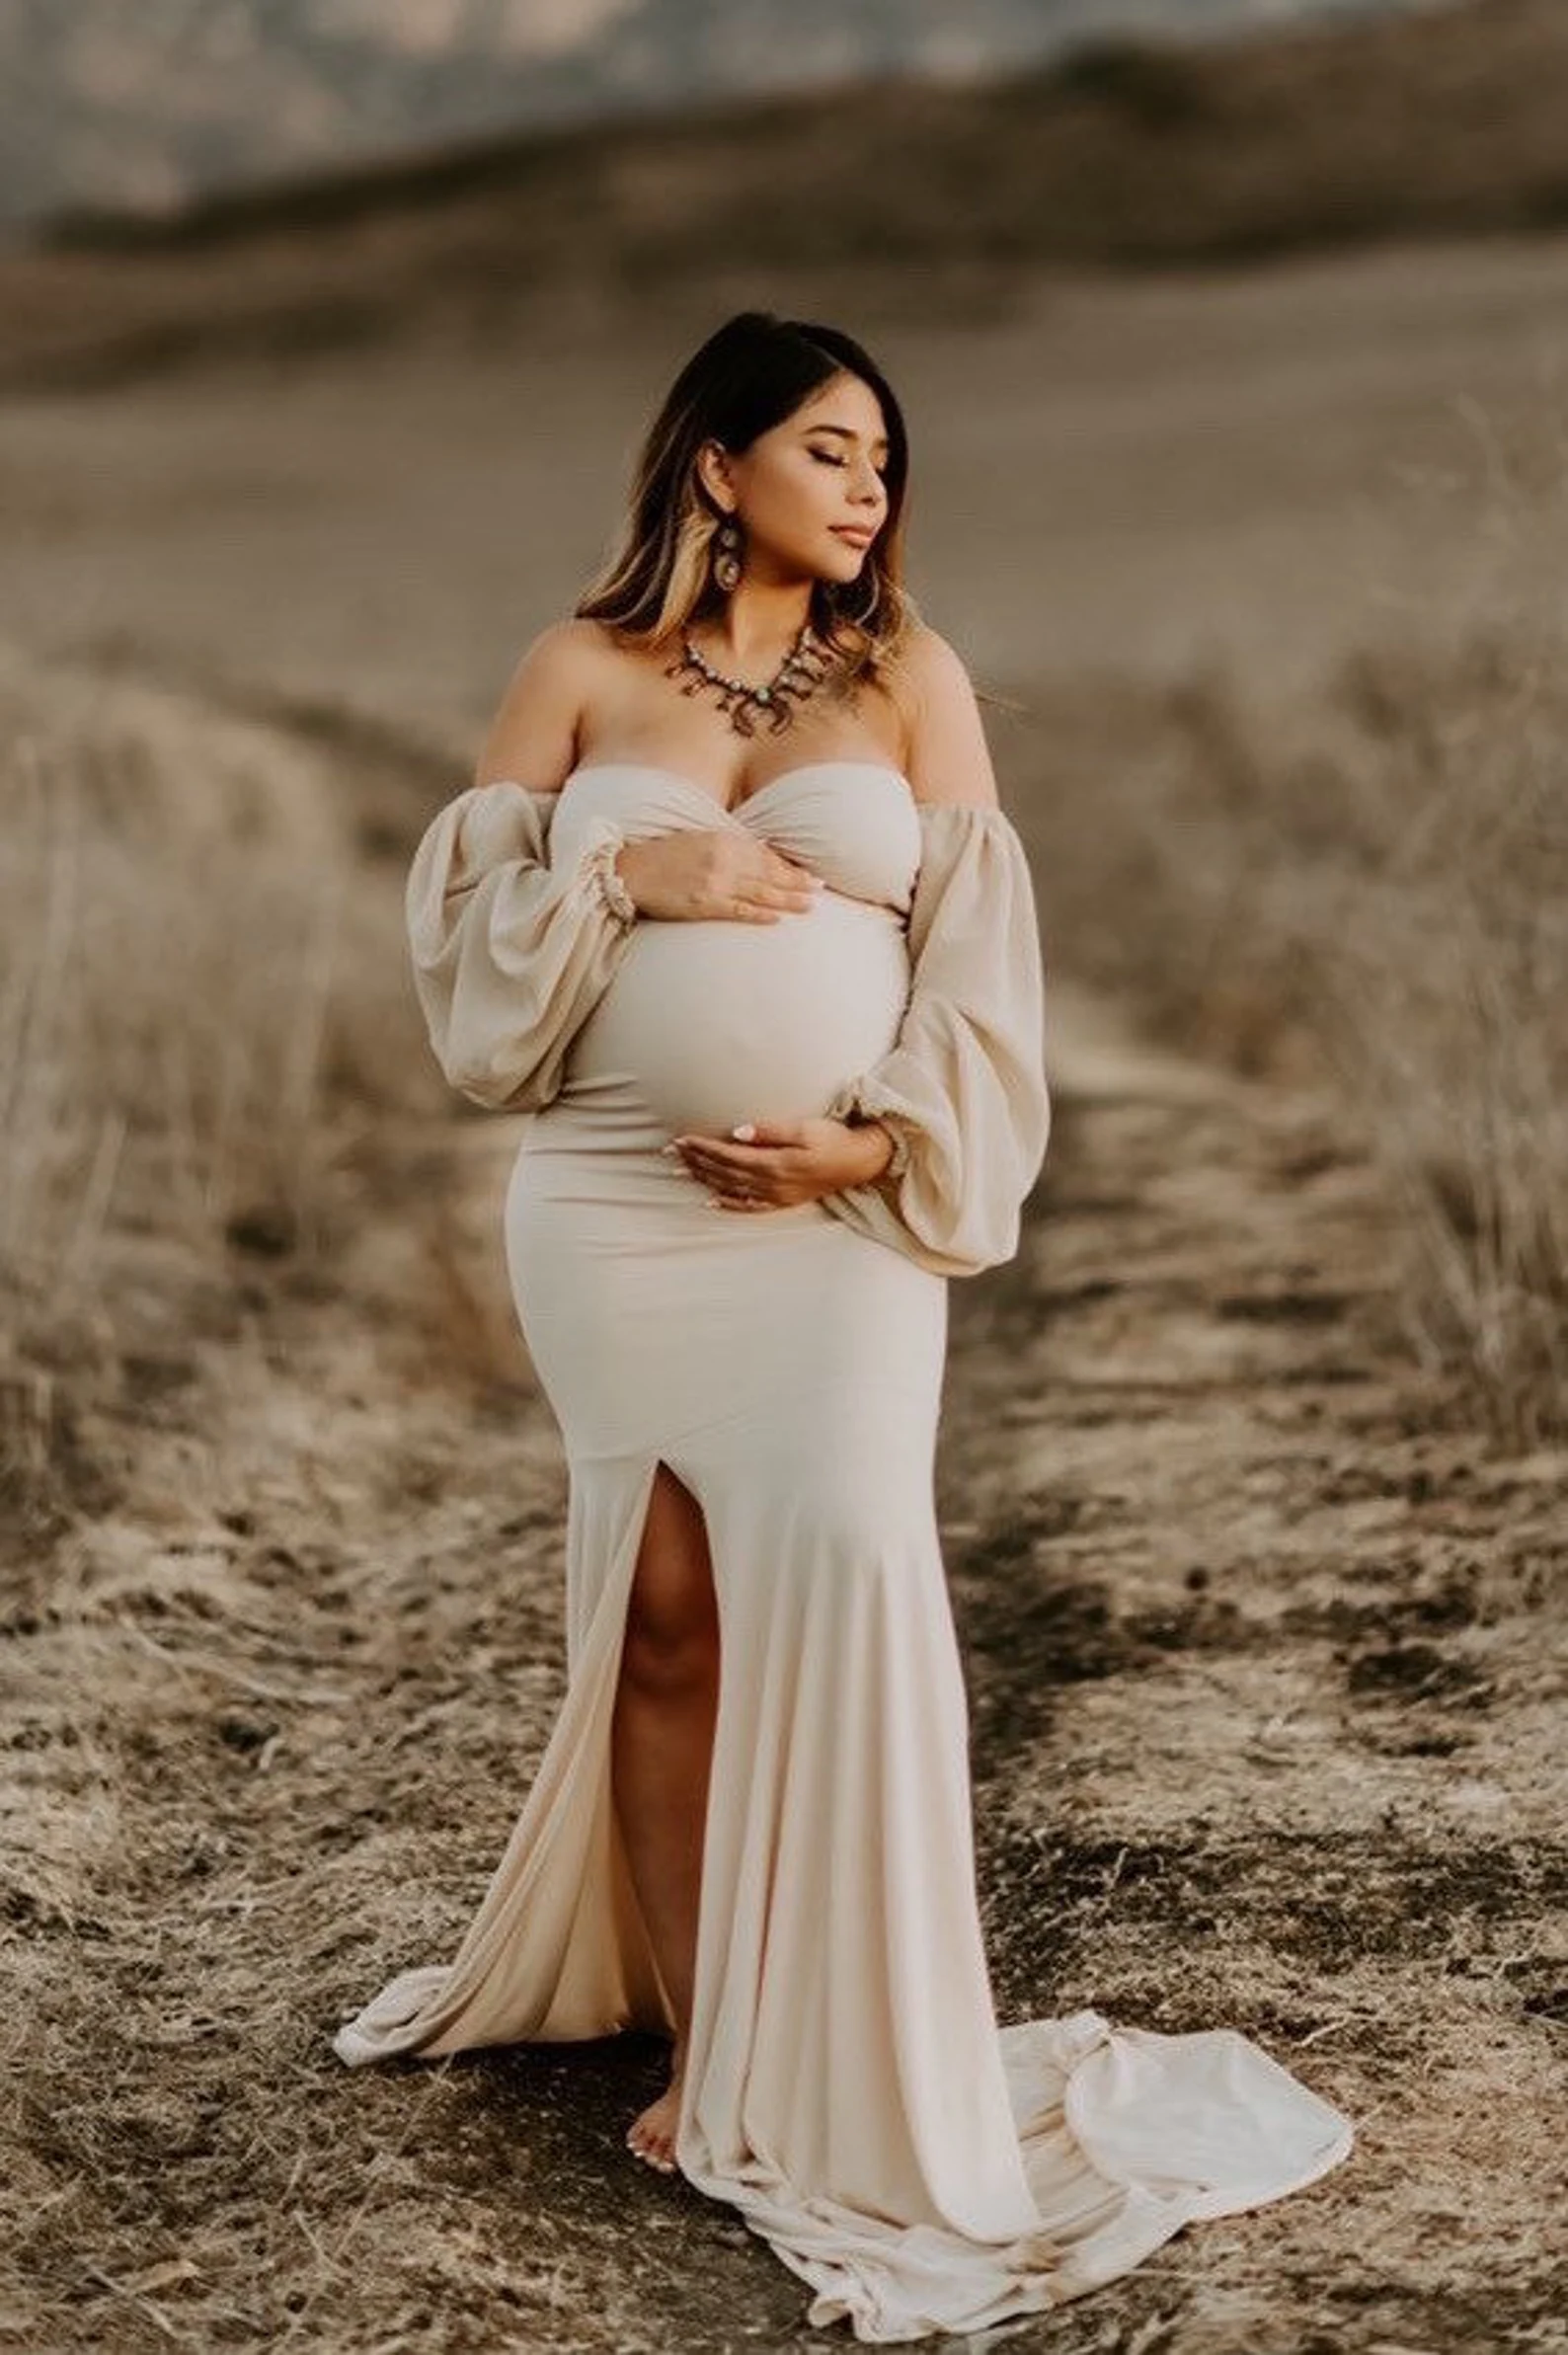 6 Maternity Photography Tips: Planning Your Maternity Photo Shoot   Maternity photography, Maternity photography tips, Maternity photoshoot  poses